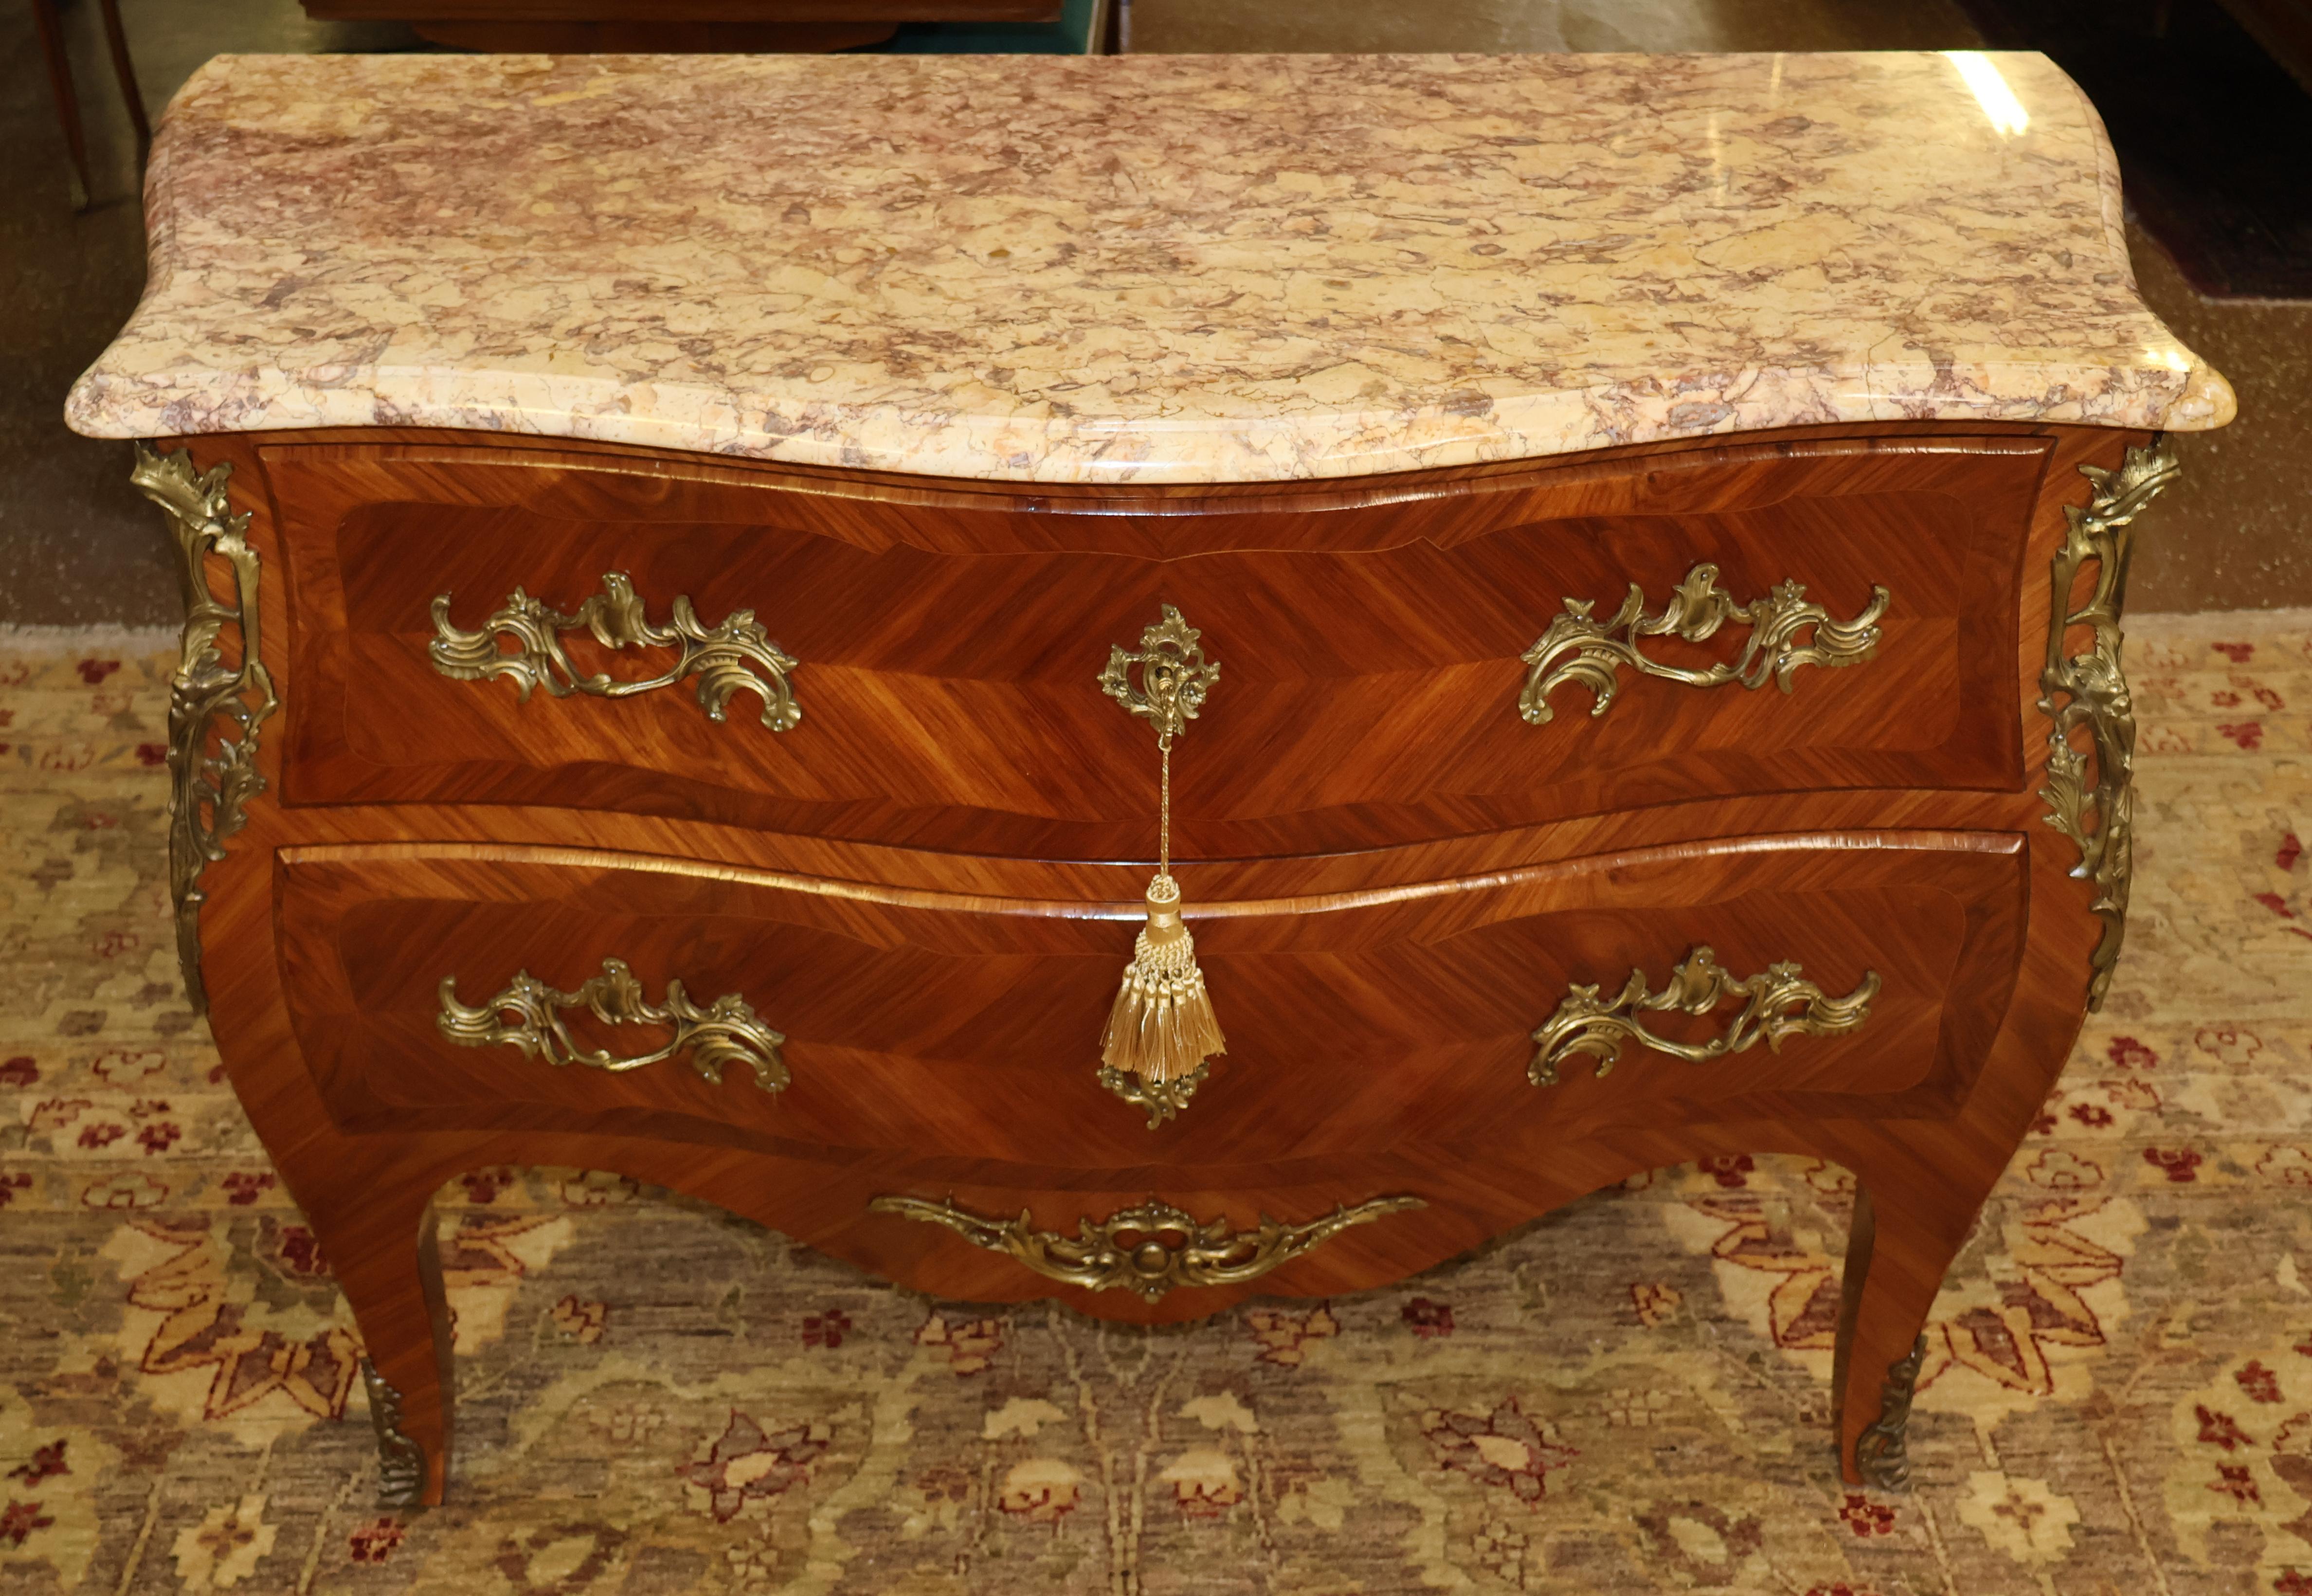 French Louis XV Style Kingwood Marble Top Commode Dresser Chest of Drawers

Dimensions : 45